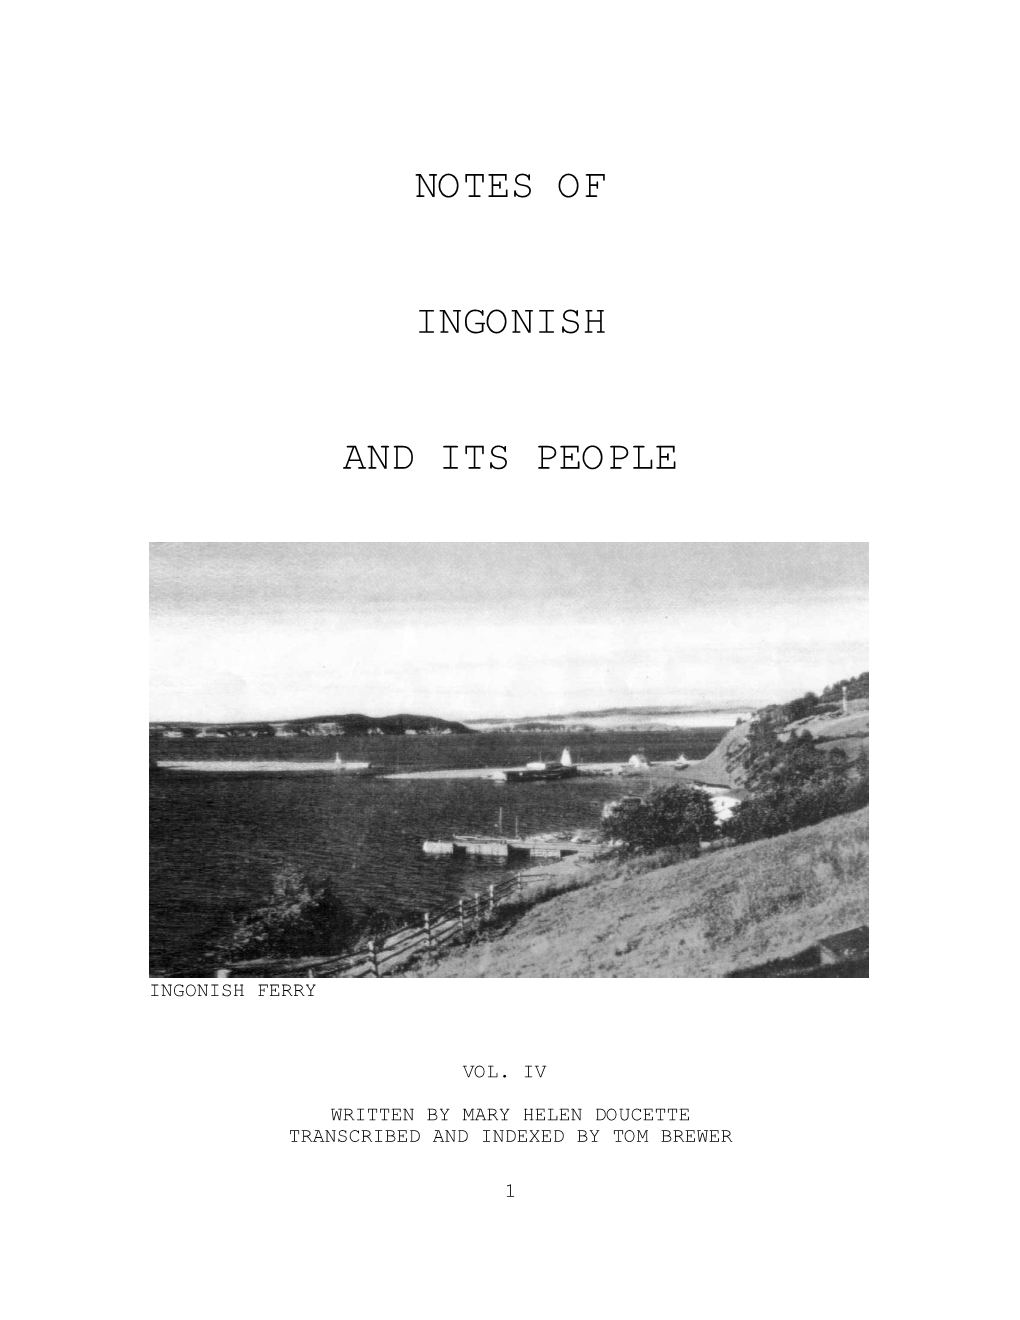 Names for Notes of Ingonish and Its People Vol. IV